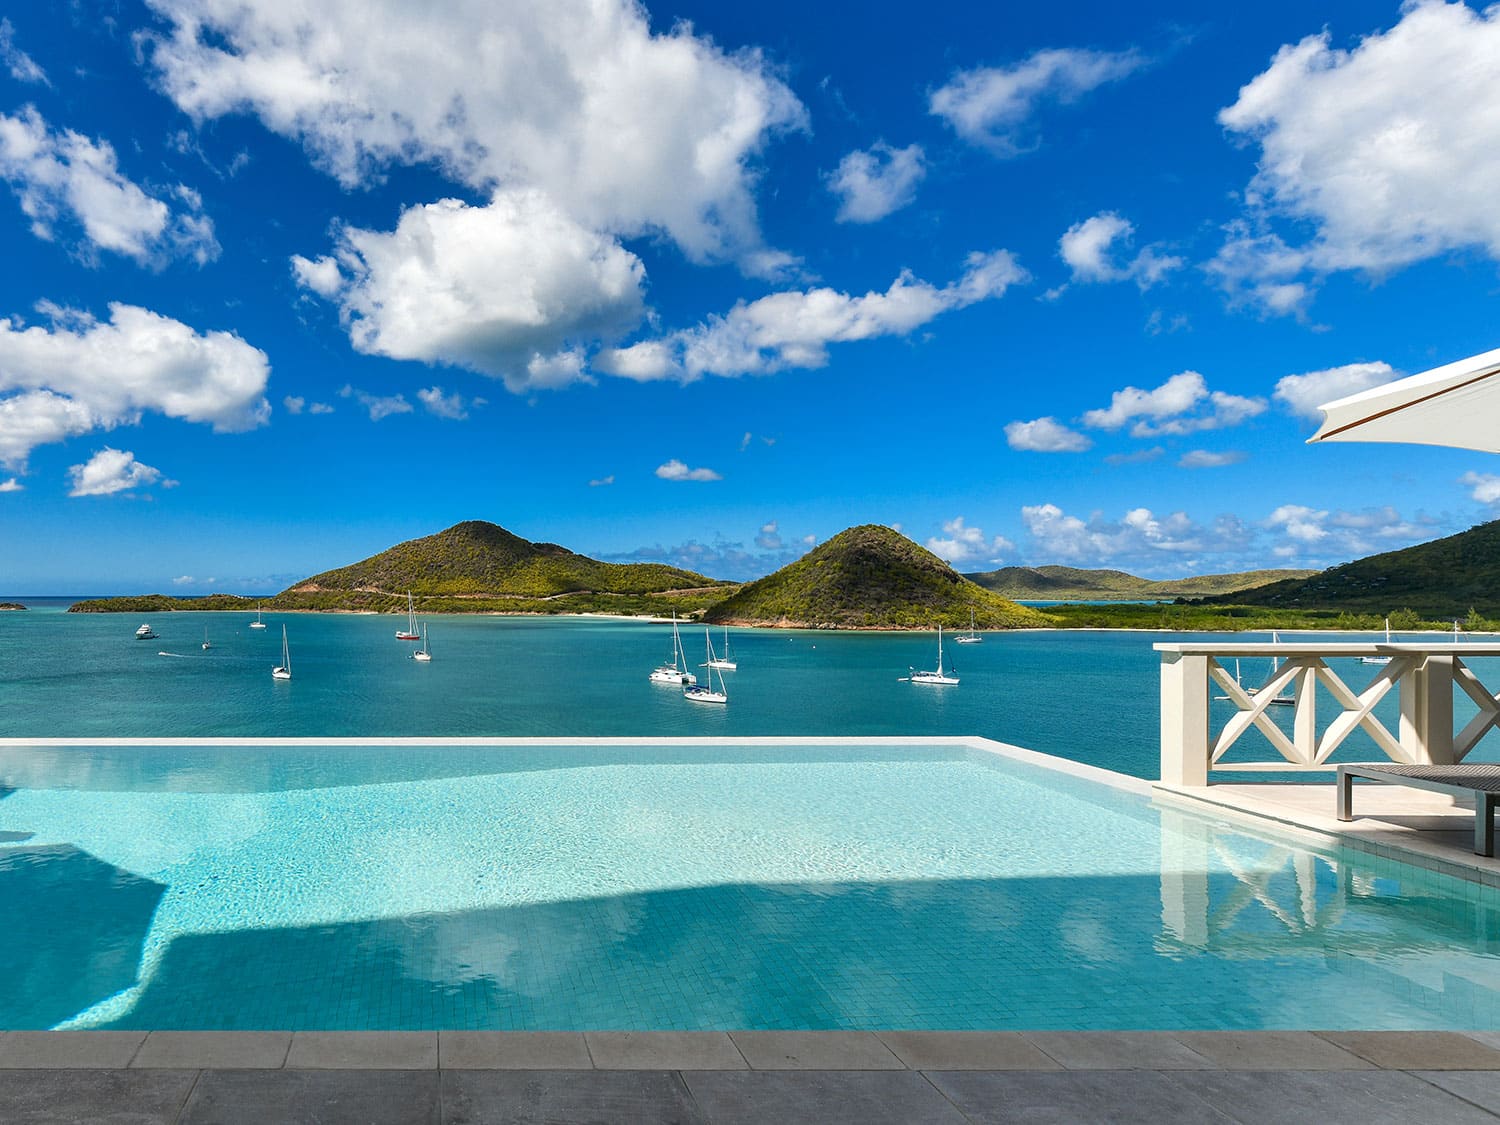 A view from the infinity pool at Villa Papillon in Antigua.